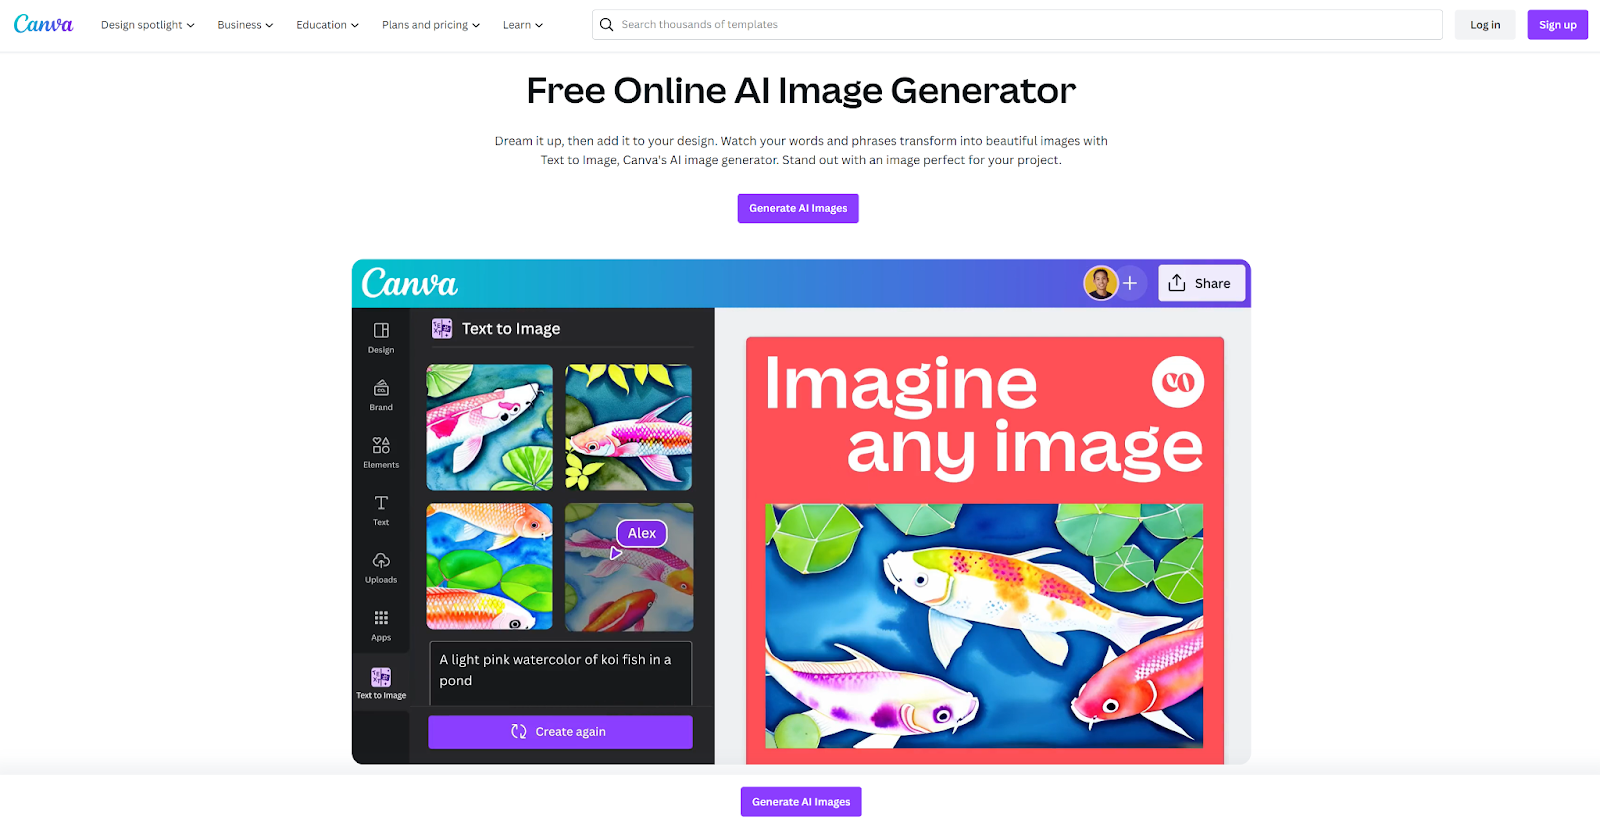 The Canva free online AI image generator homepage.